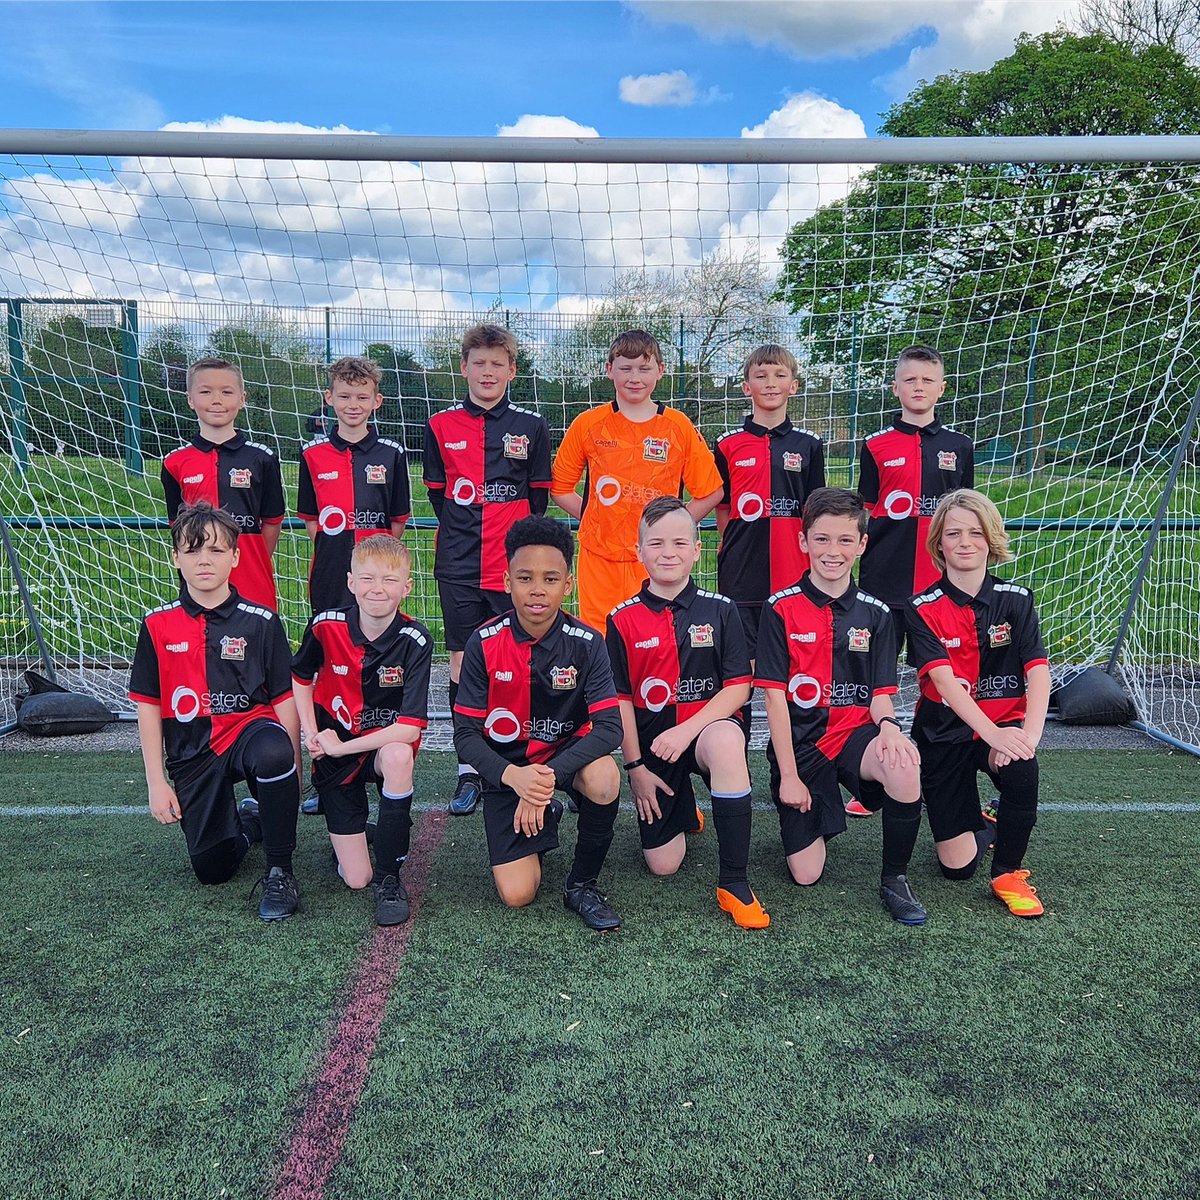 👏 𝗧𝗵𝗲 𝗜𝗻𝘃𝗶𝗻𝗰𝗶𝗯𝗹𝗲'𝘀! Congratulations to our Under 11s for winning the Kelham League undefeated 🔴⚫️ #TheWorldsFirst